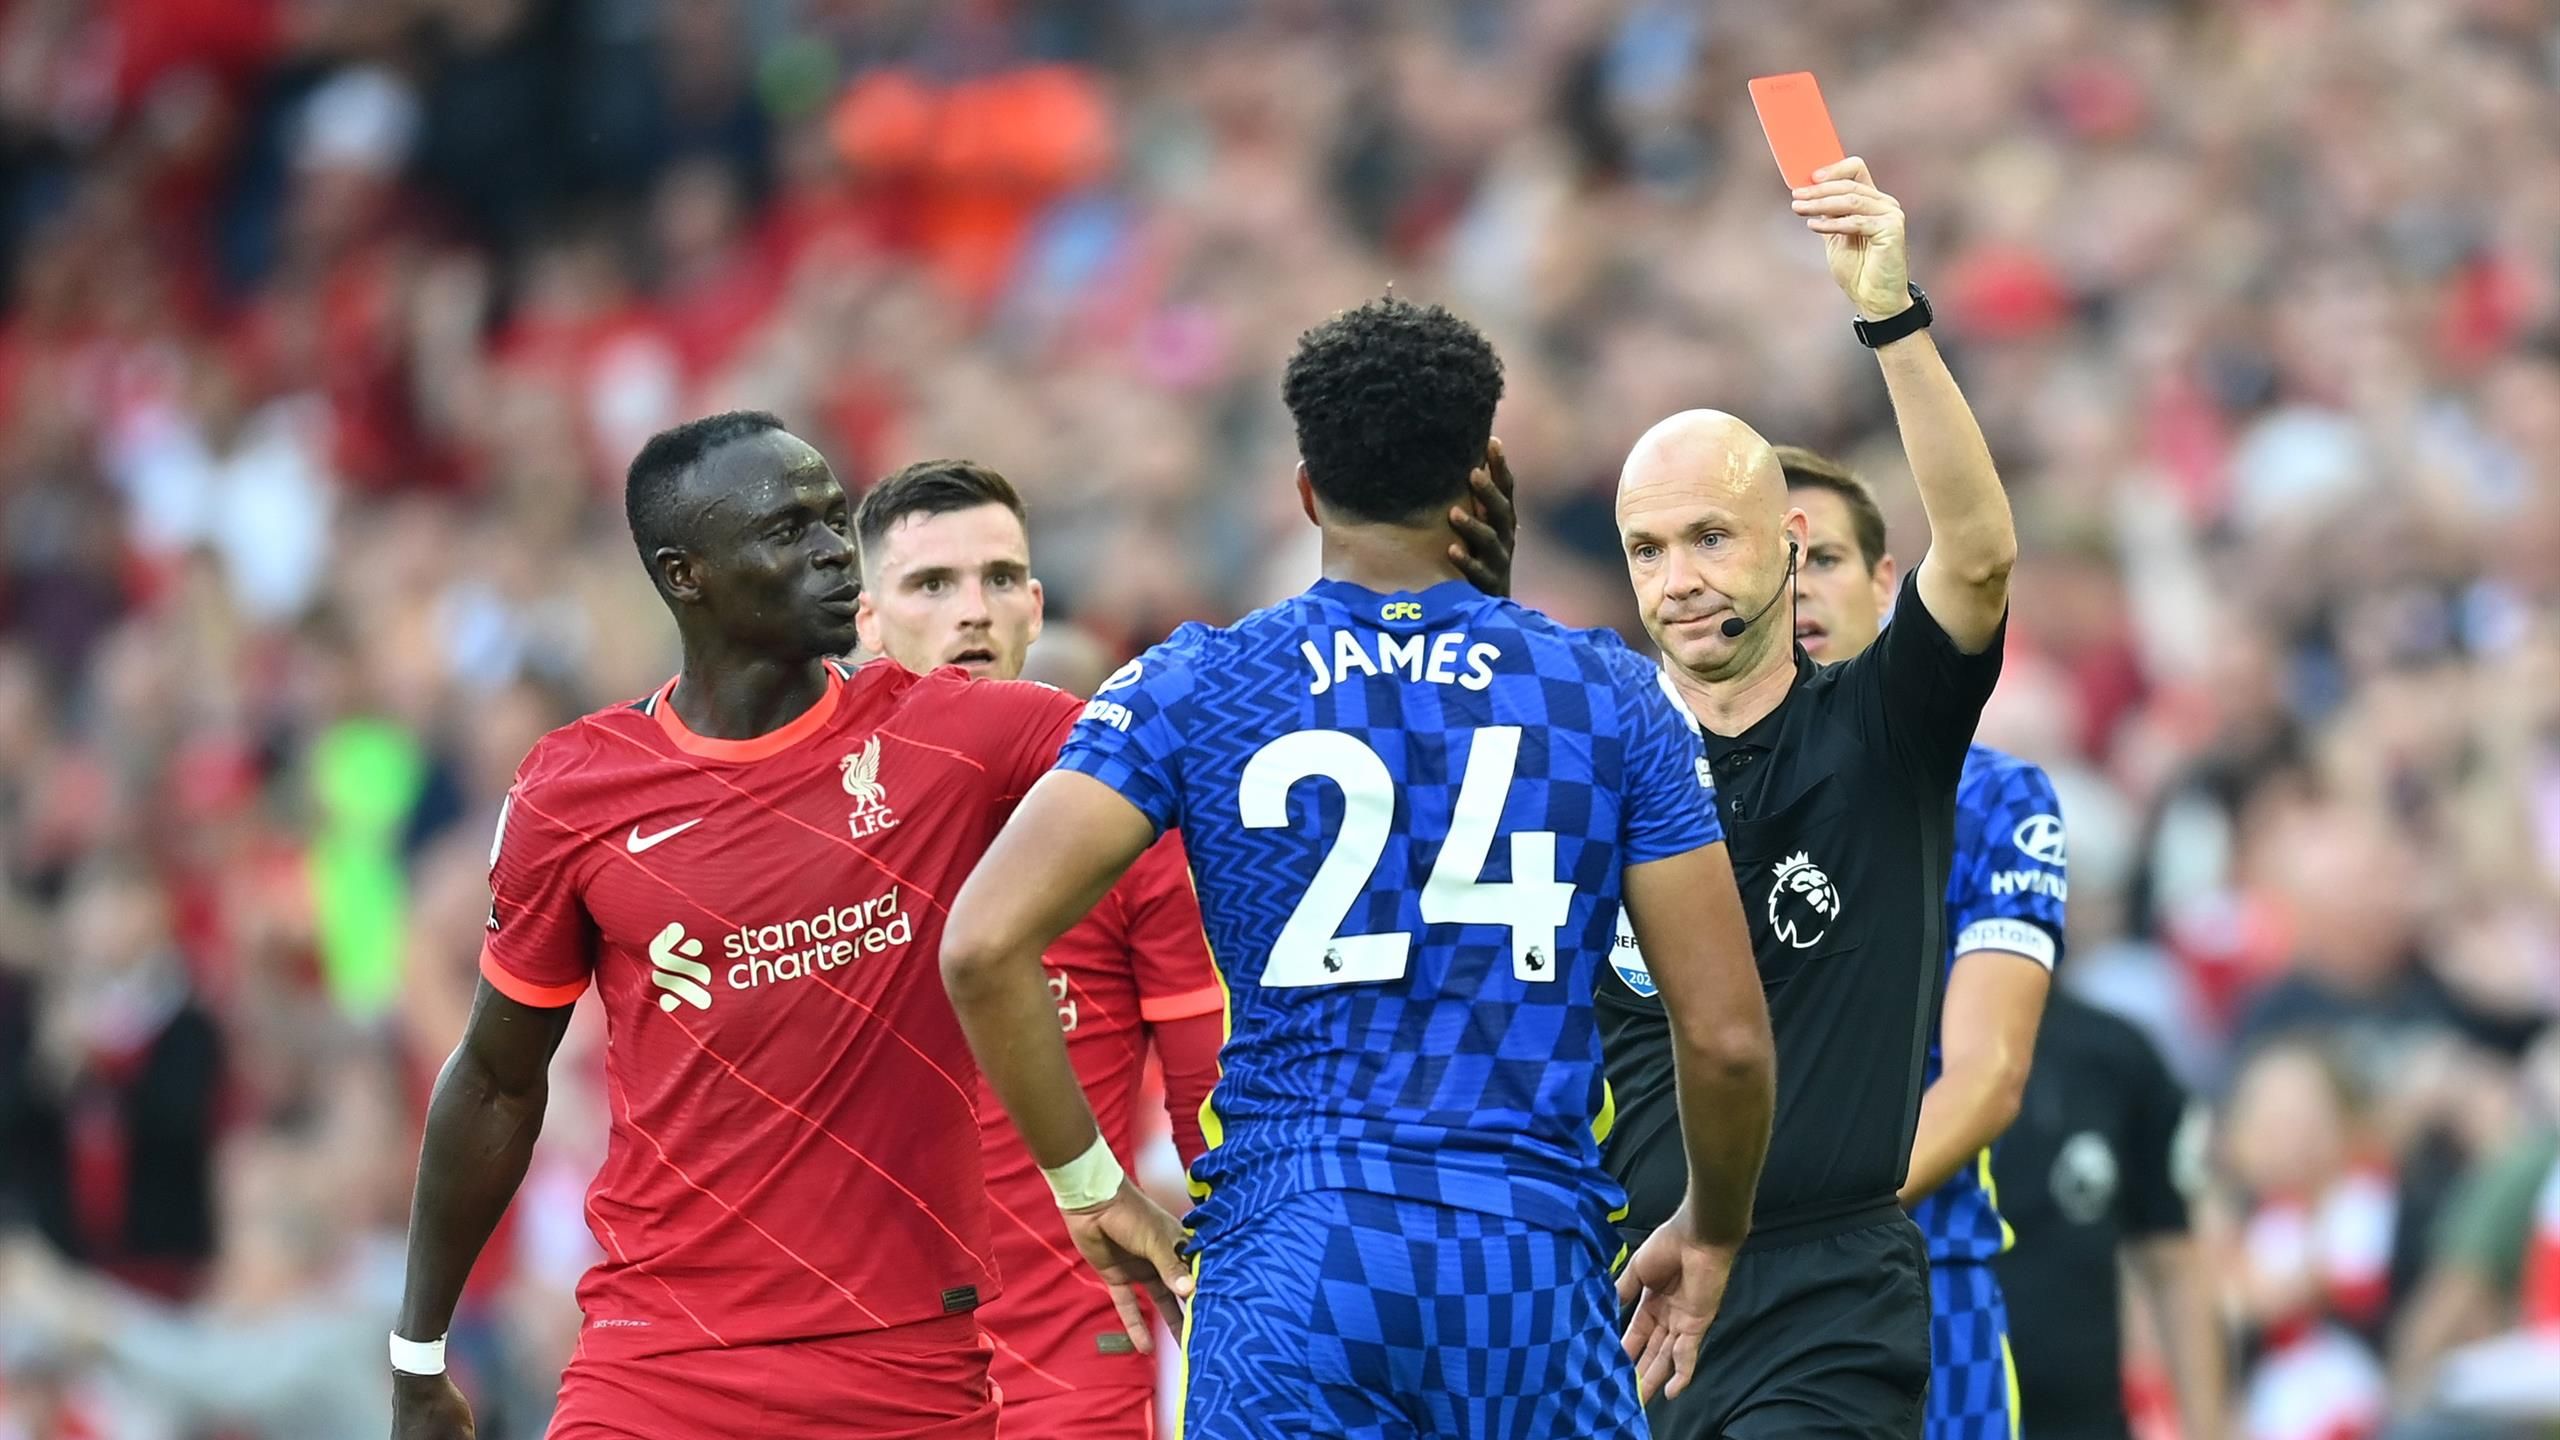 I Think He Took It Too Quick Thomas Tuchel Felt Anthony Taylor Should Have Taken Longer Over Reece James Red Card Eurosport